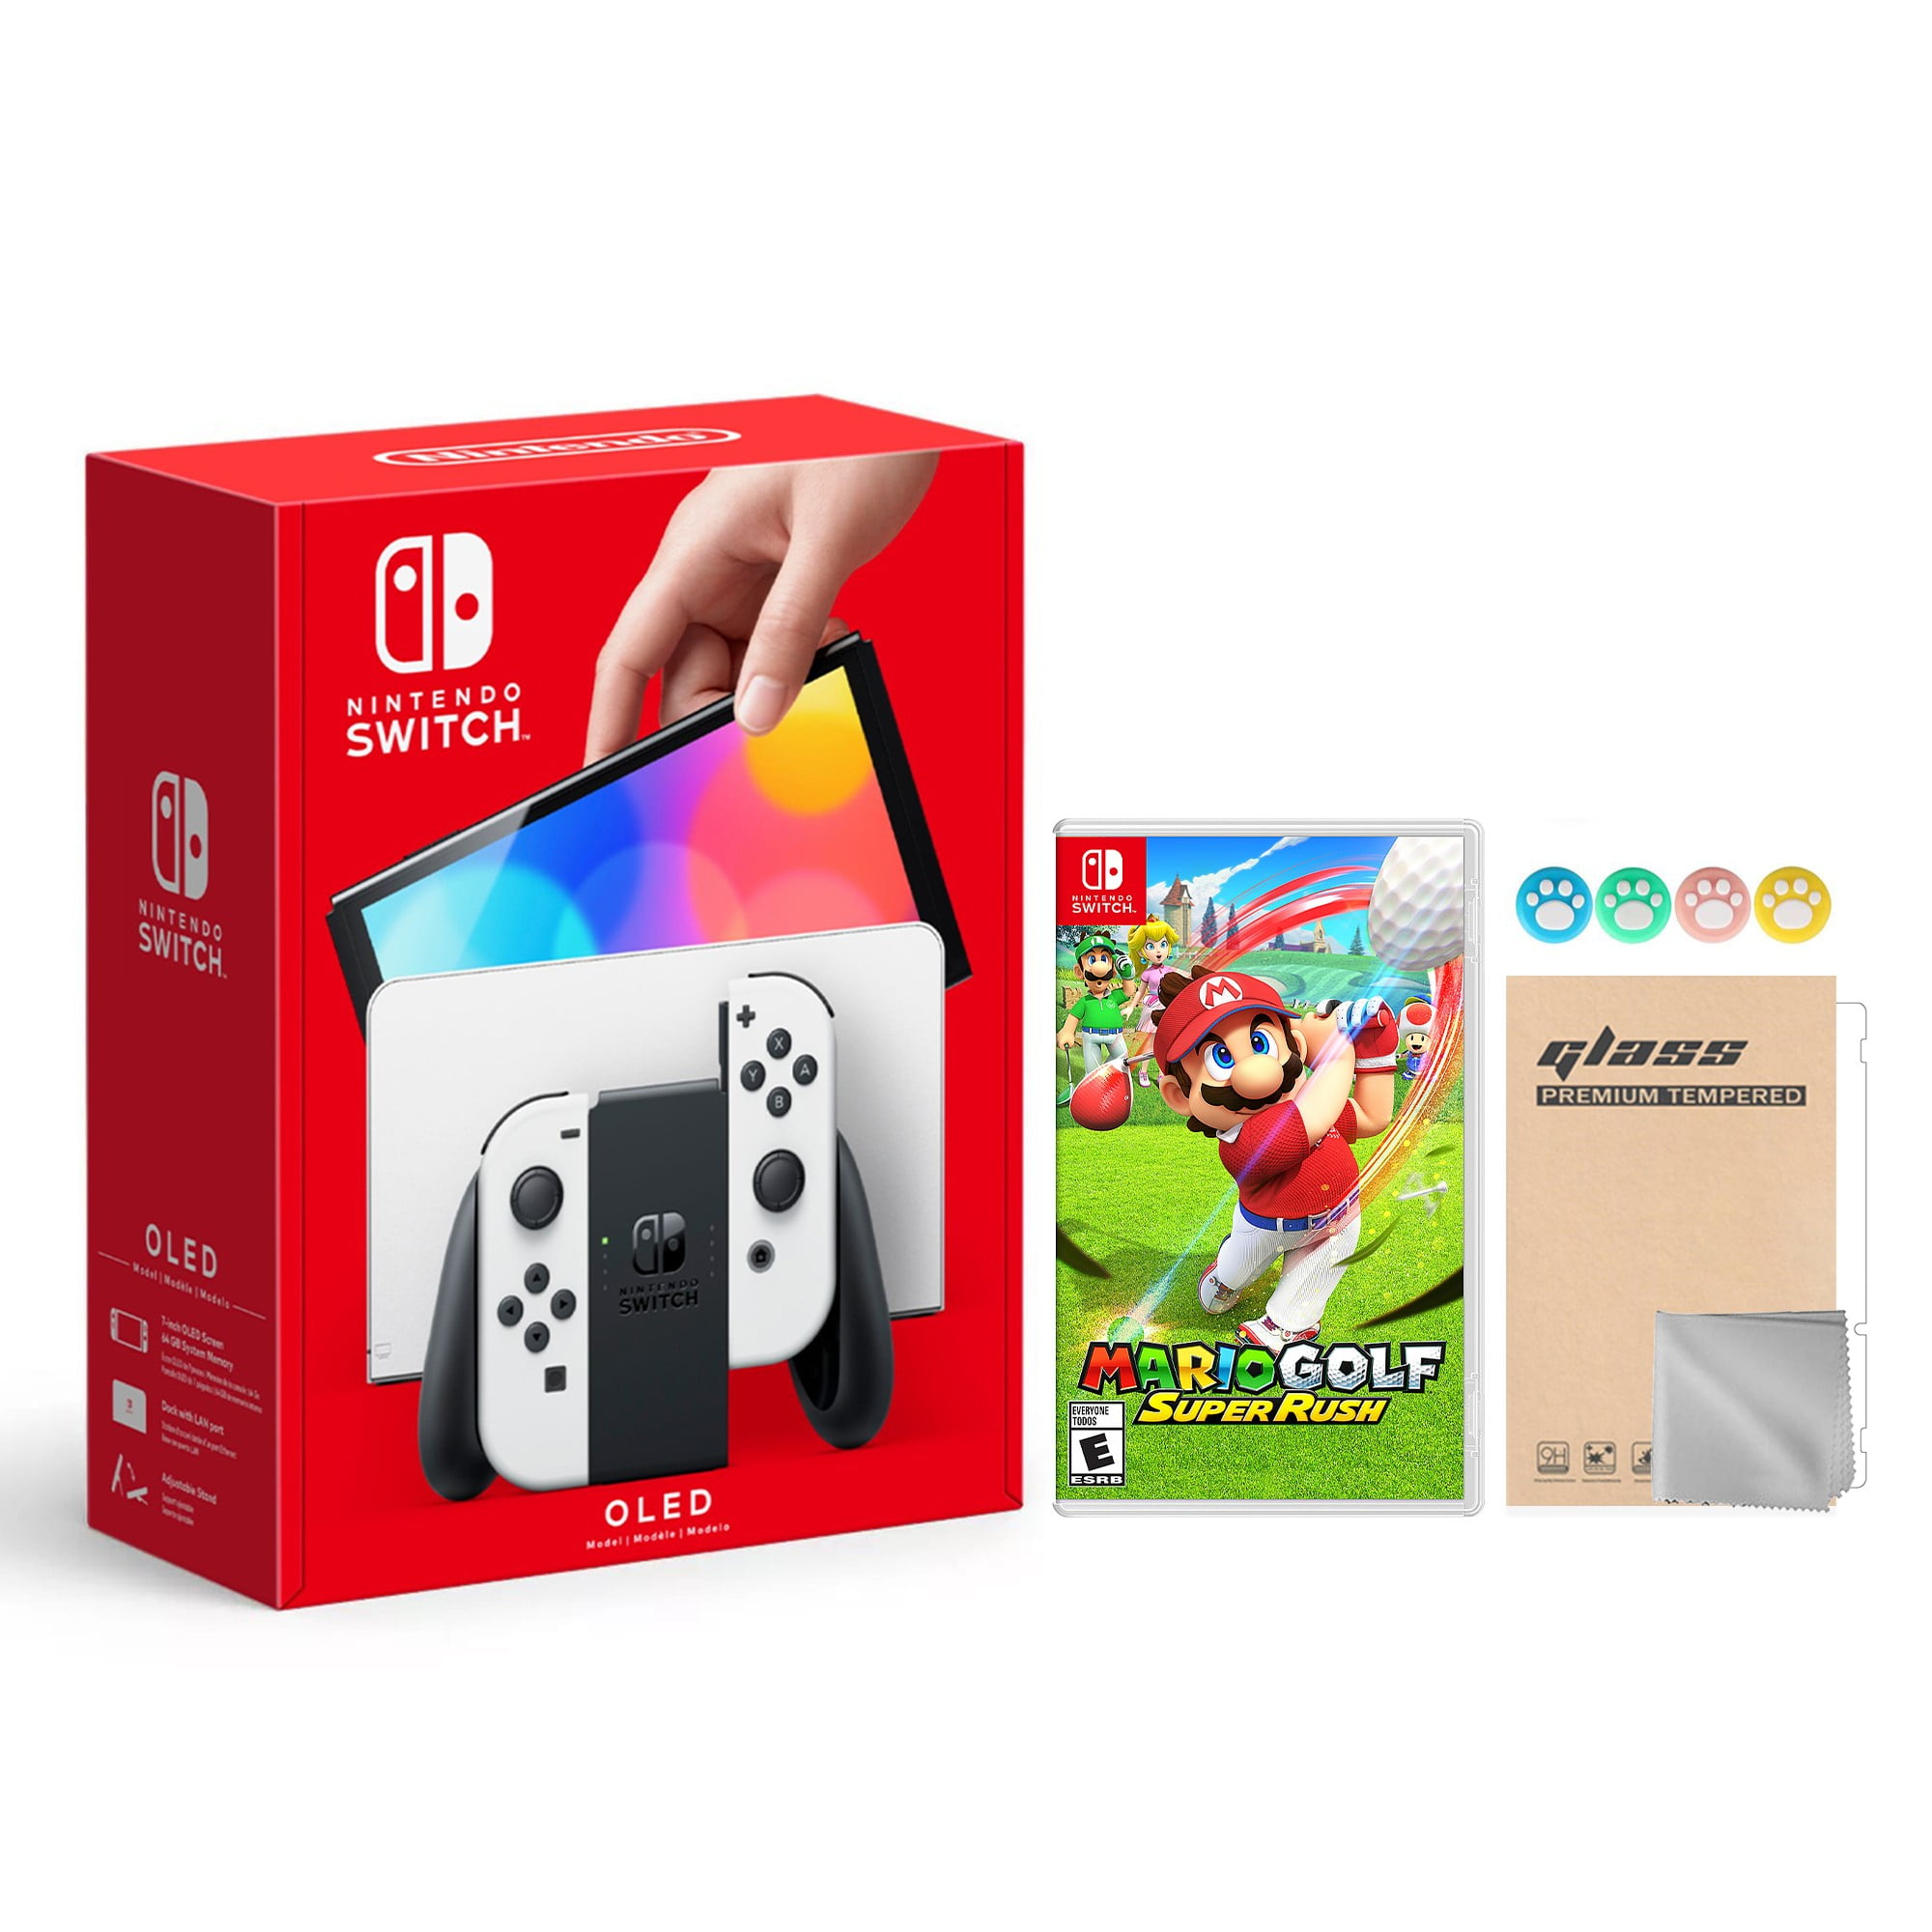 Nintendo Switch OLED Model White HD The Improved 64GB Dock Legend Sword And Mytrix - - Version of Free HD Region Accessories & Console JP Zelda: Skyward Con Screen LAN-Port with Joy